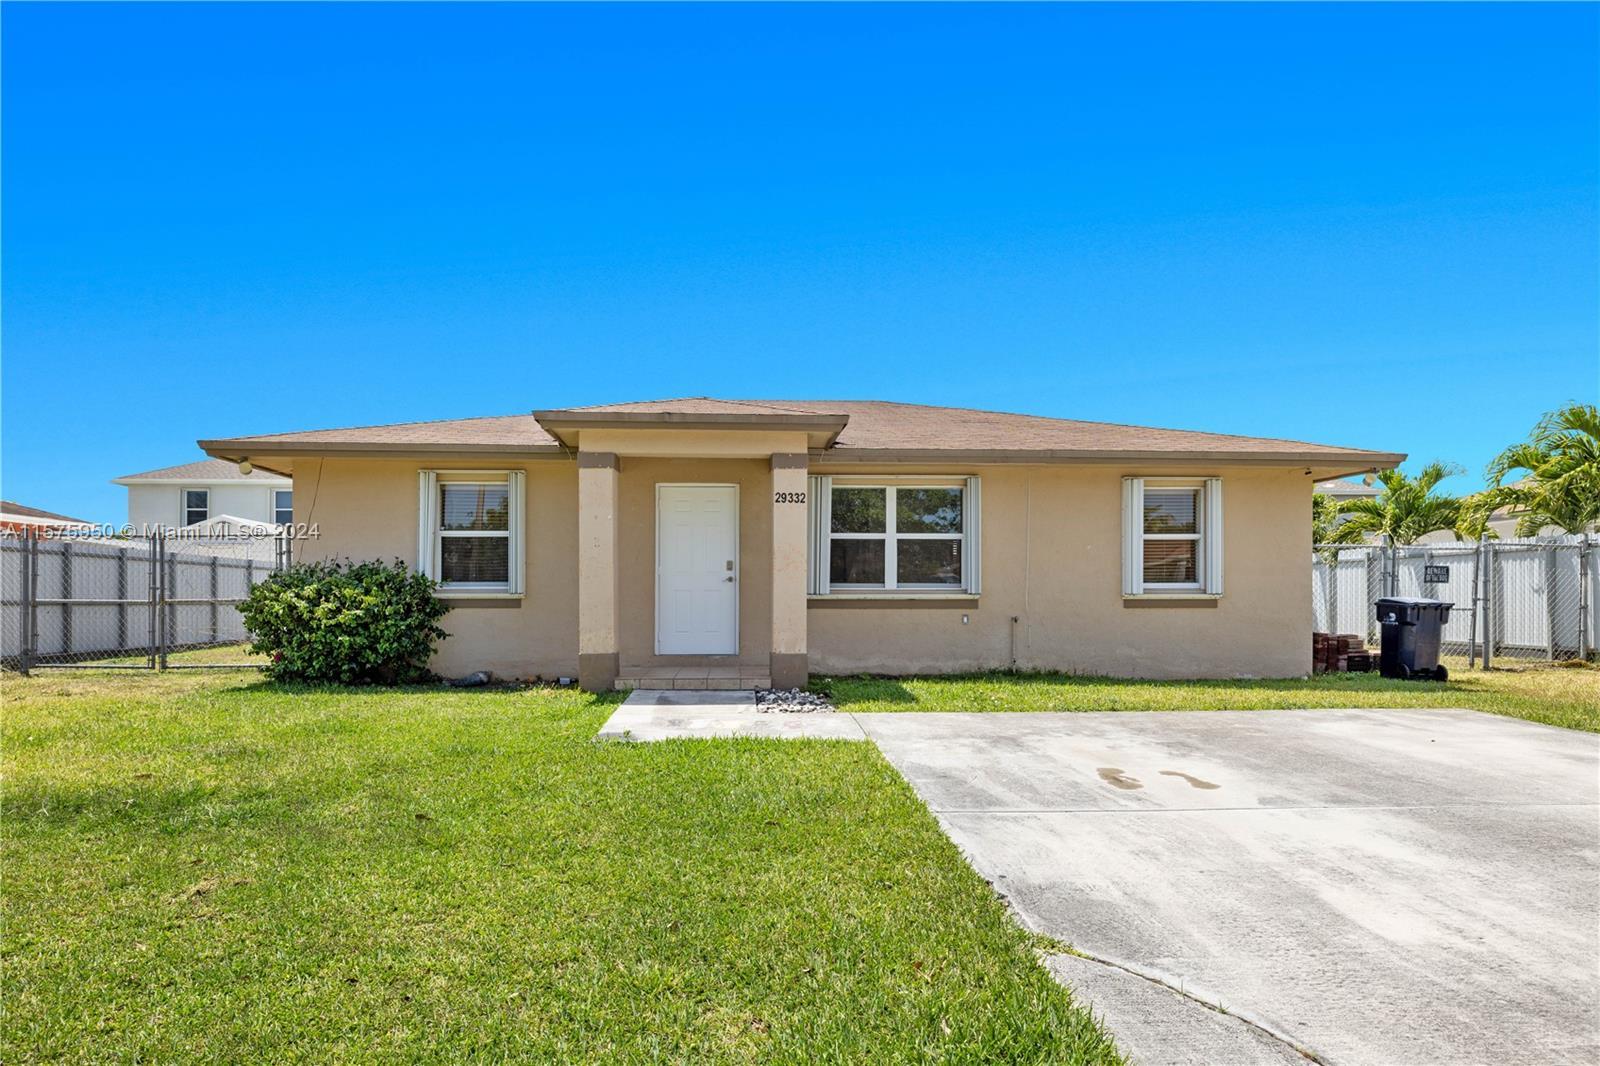 Great starter home that consists of 3 Bed 2 Bath in Homestead. This property features an open kitche